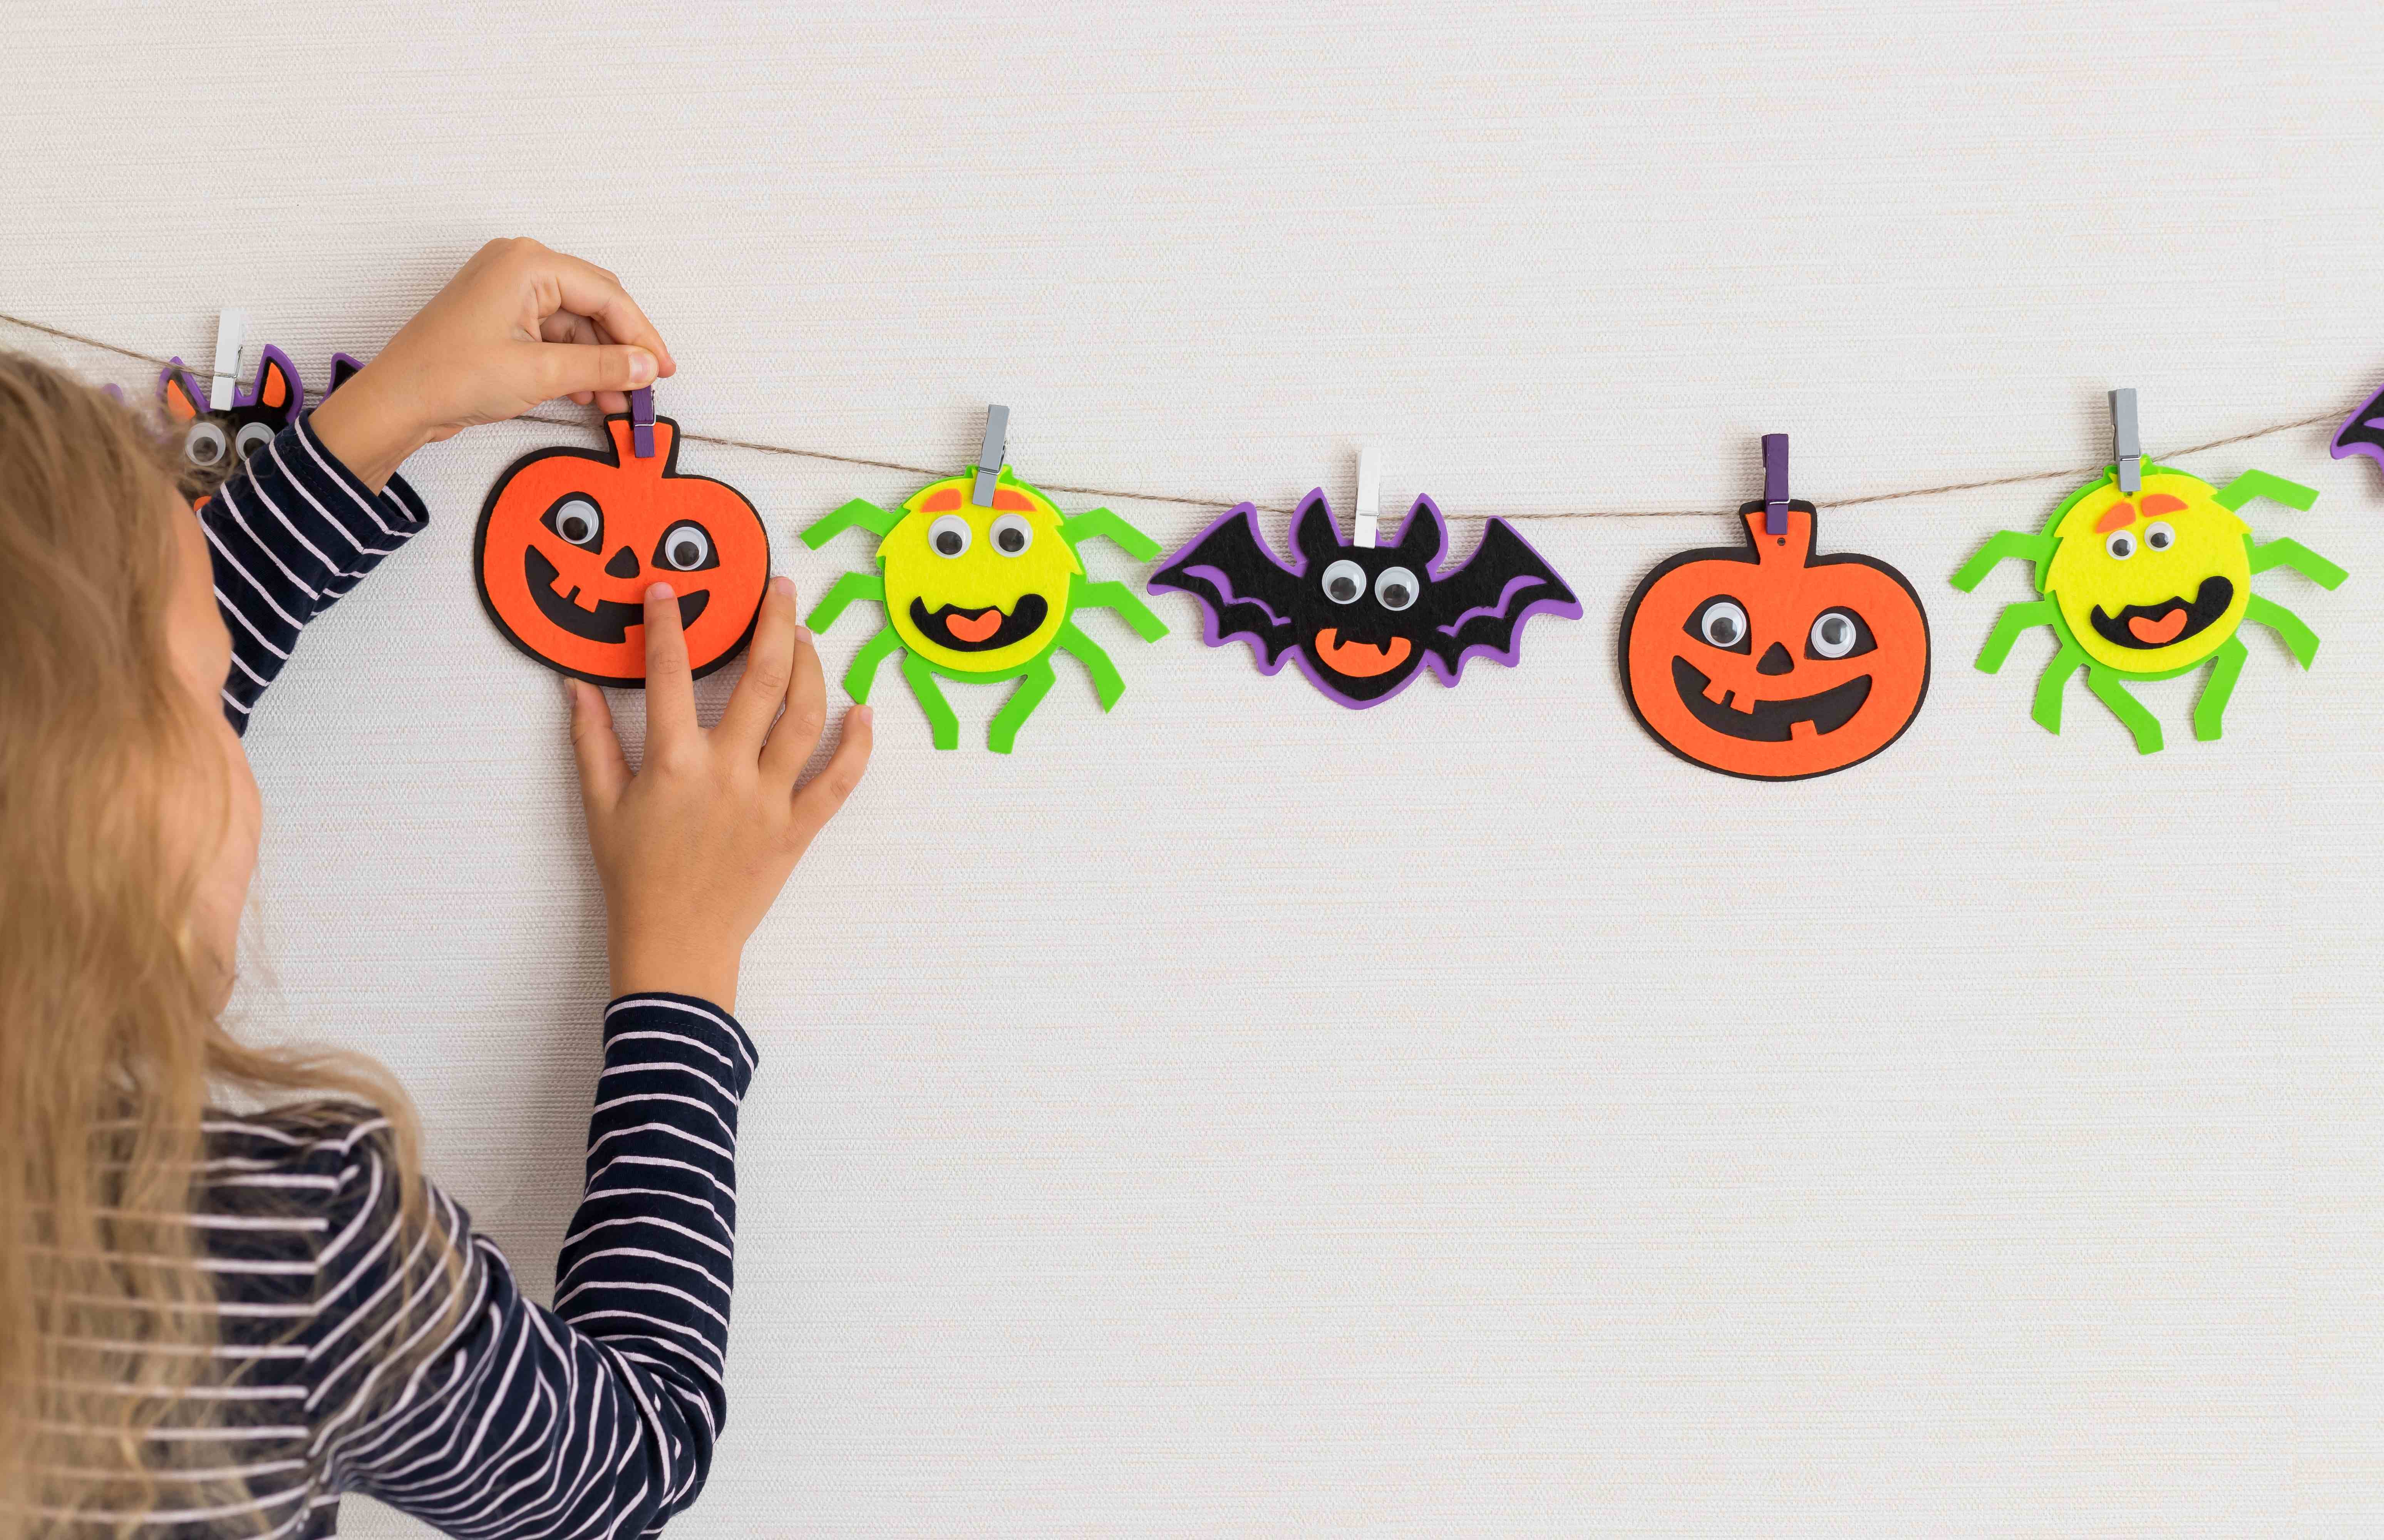 A little girl puts up family-friendly DIY Halloween decorations at home